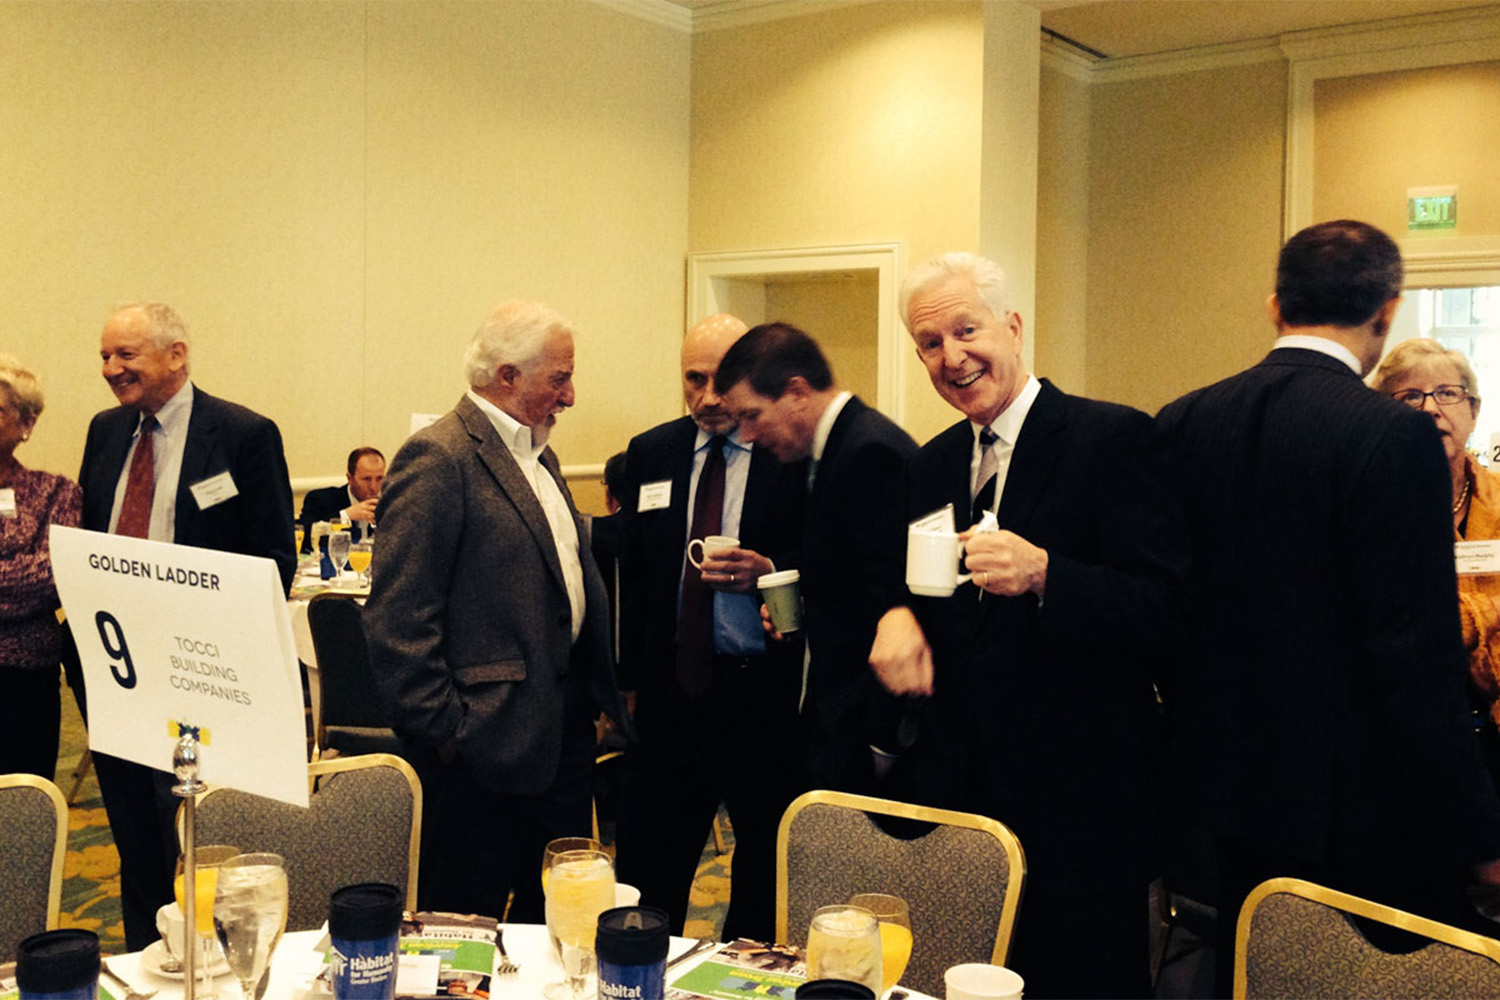 John Tocci enjoying his morning cup of coffee at the American Dream Awards.